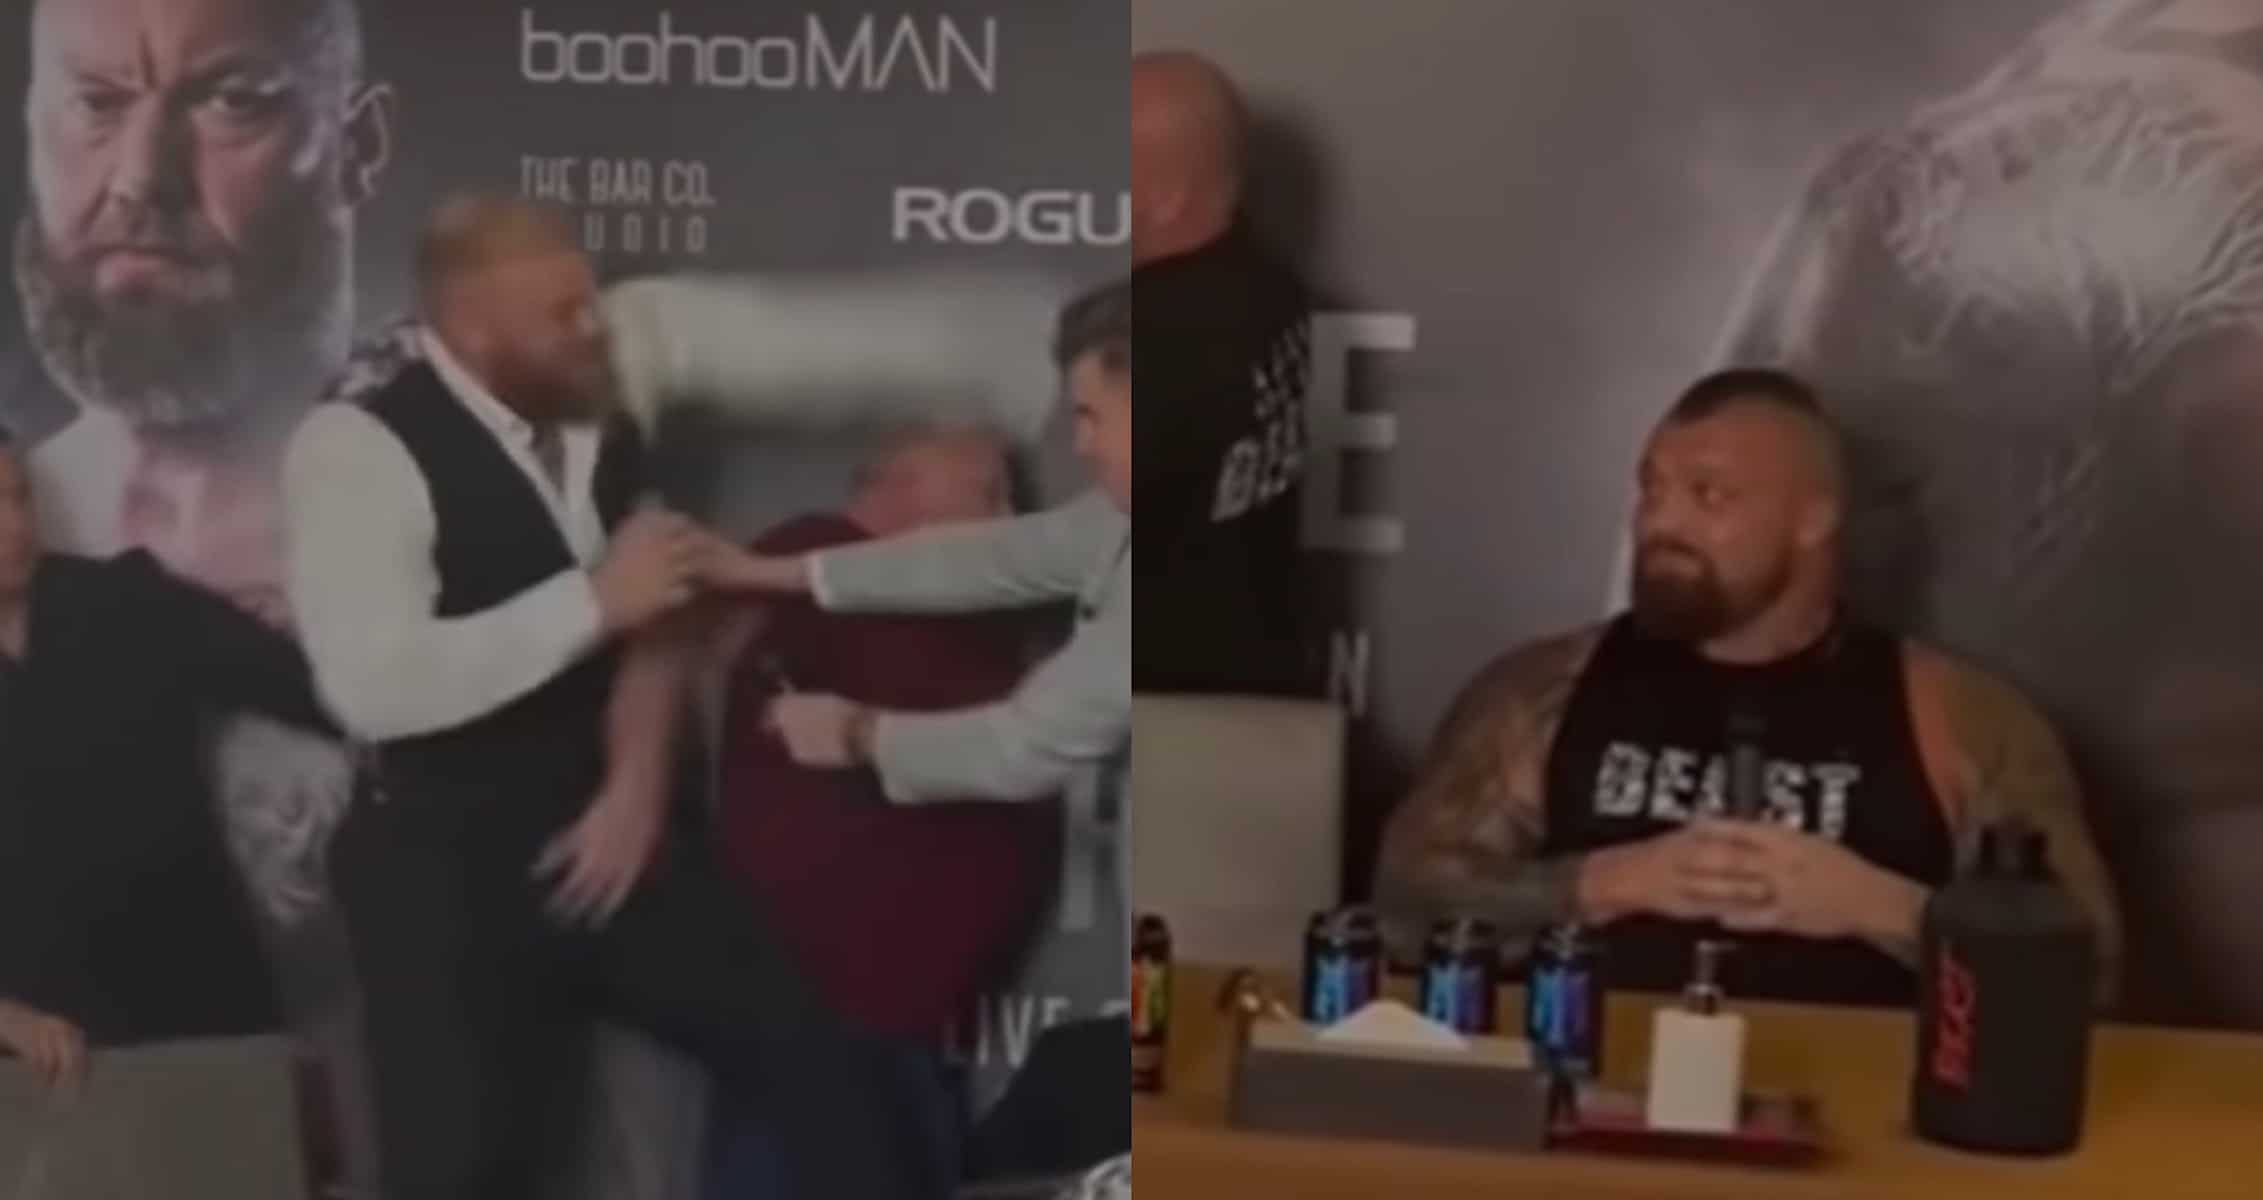 After Eddie Hall Mentions His Mom, Thor Bjornsson Attacks Him at Press Conference